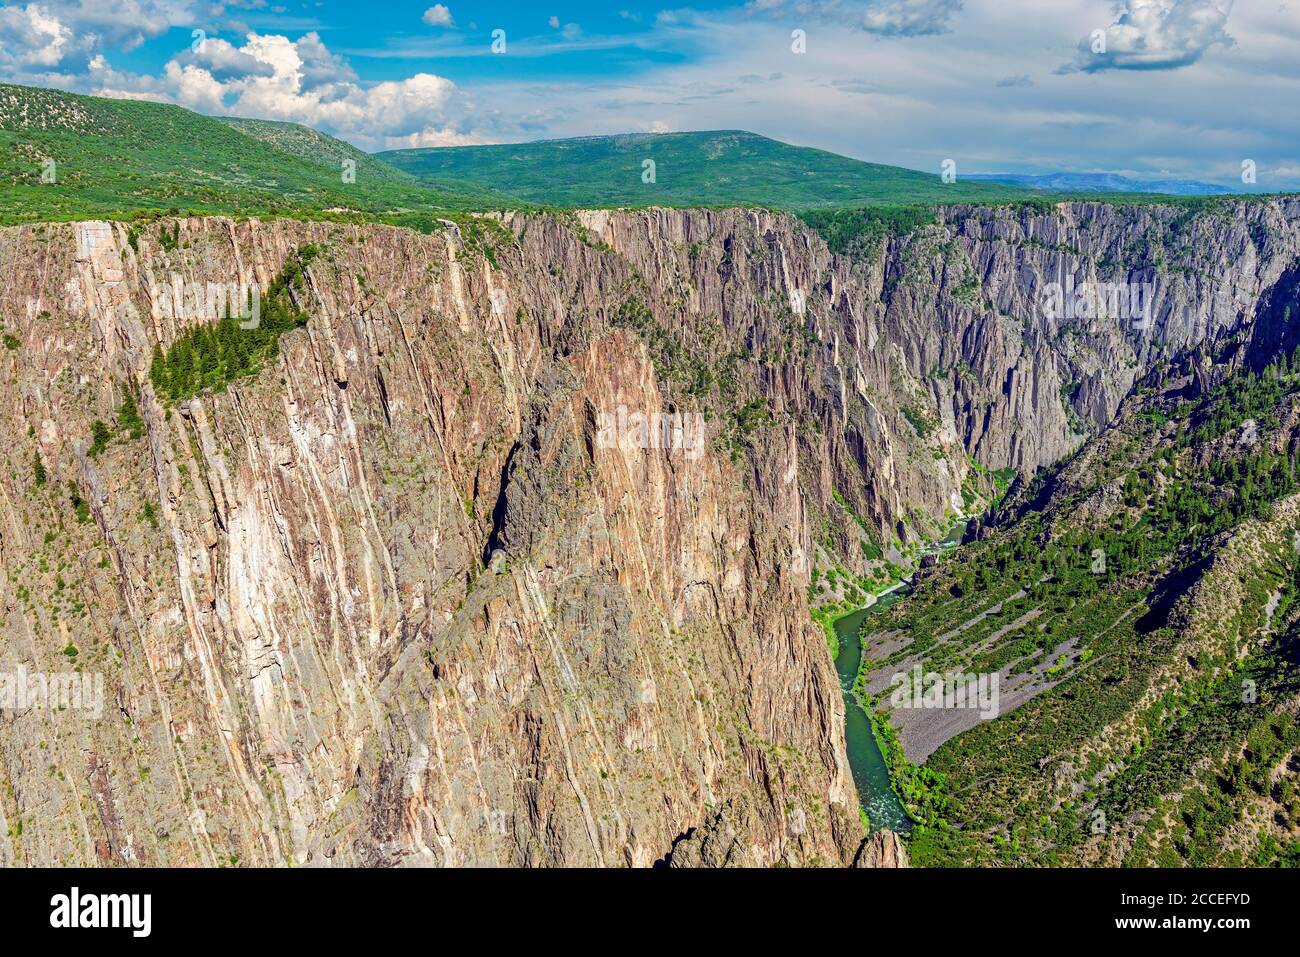 The Gunnison river and the steep Black Canyon near sunset, Black Canyon of the Gunnison National Park, Colorado, United States of America (USA). Stock Photo